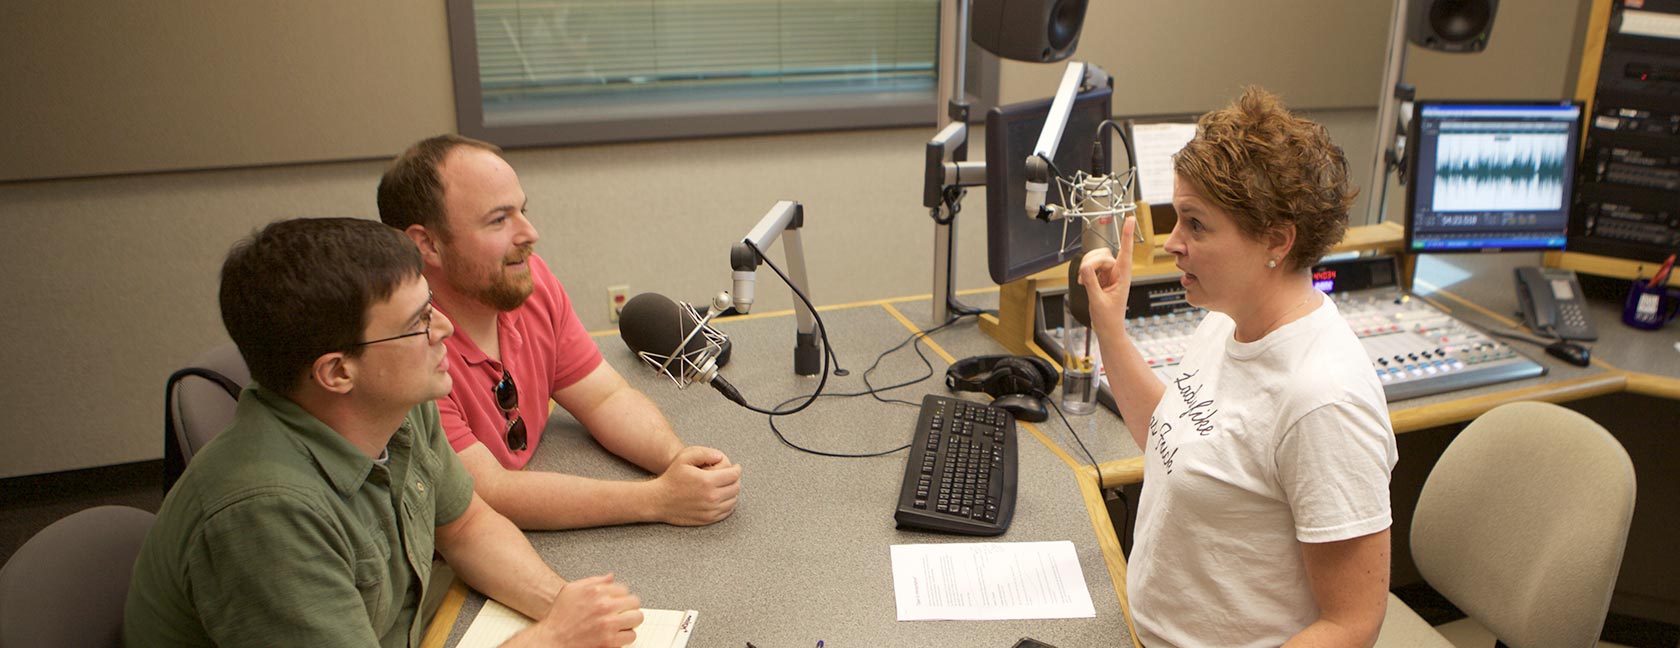 Amy Young, Kevin O’Brien and Justin Eckstein discuss "advocacy" in KPLU's Tacoma studio.